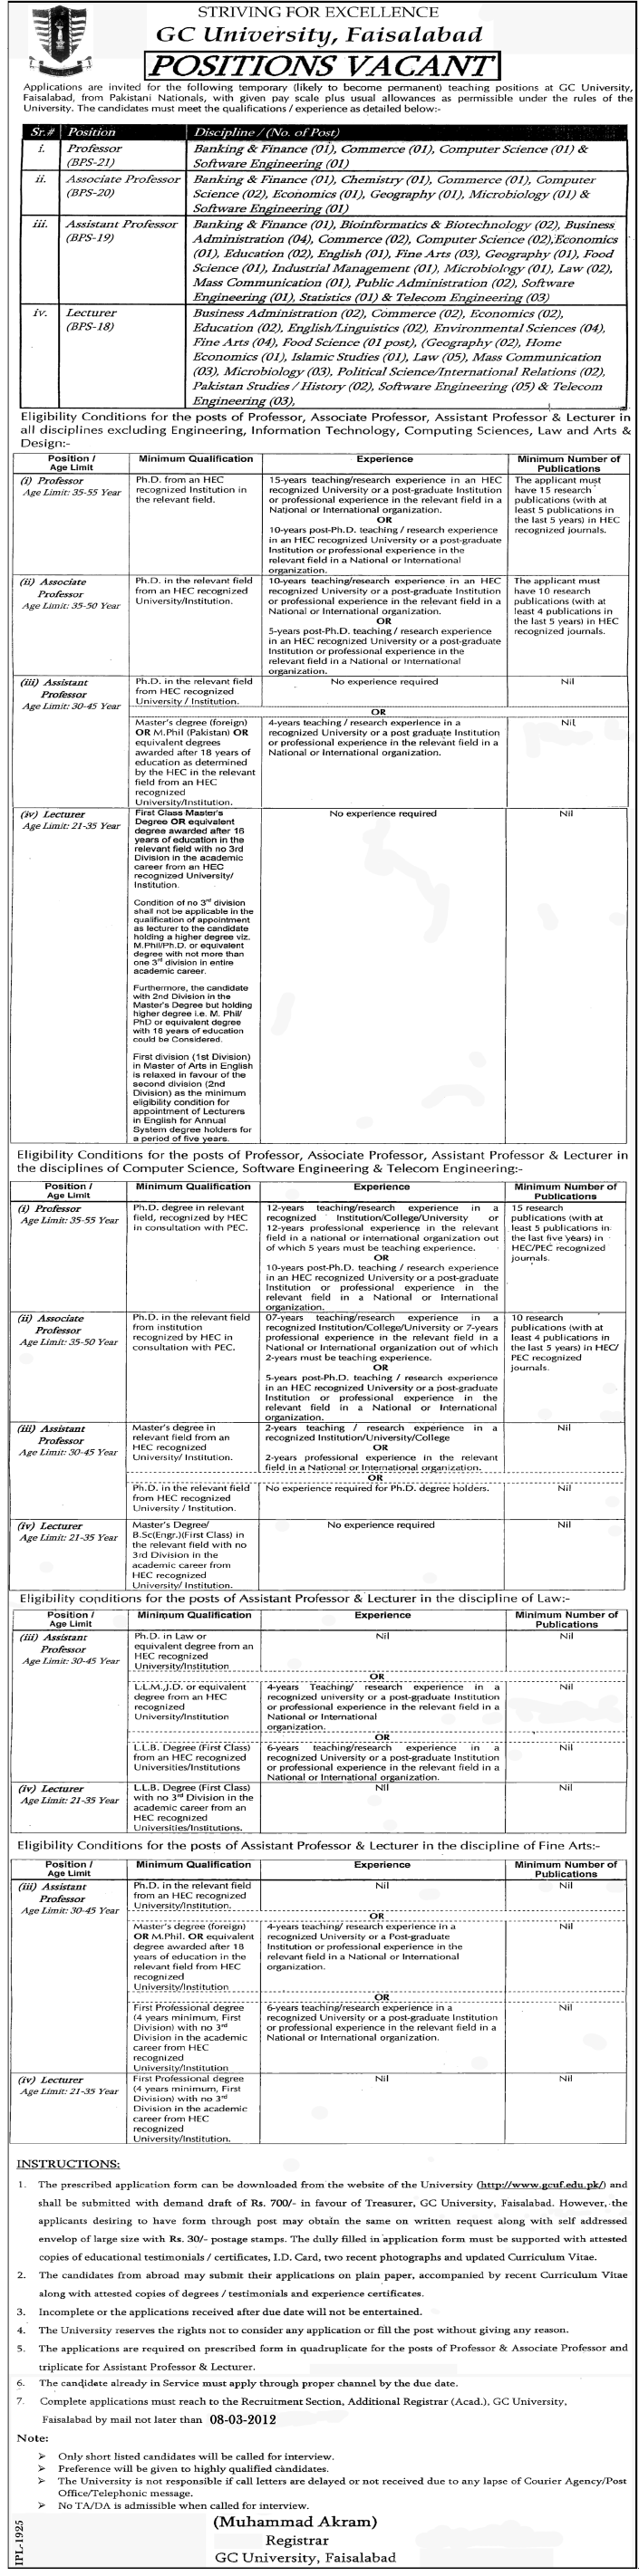 GC University, Faisalabad Required Faculty